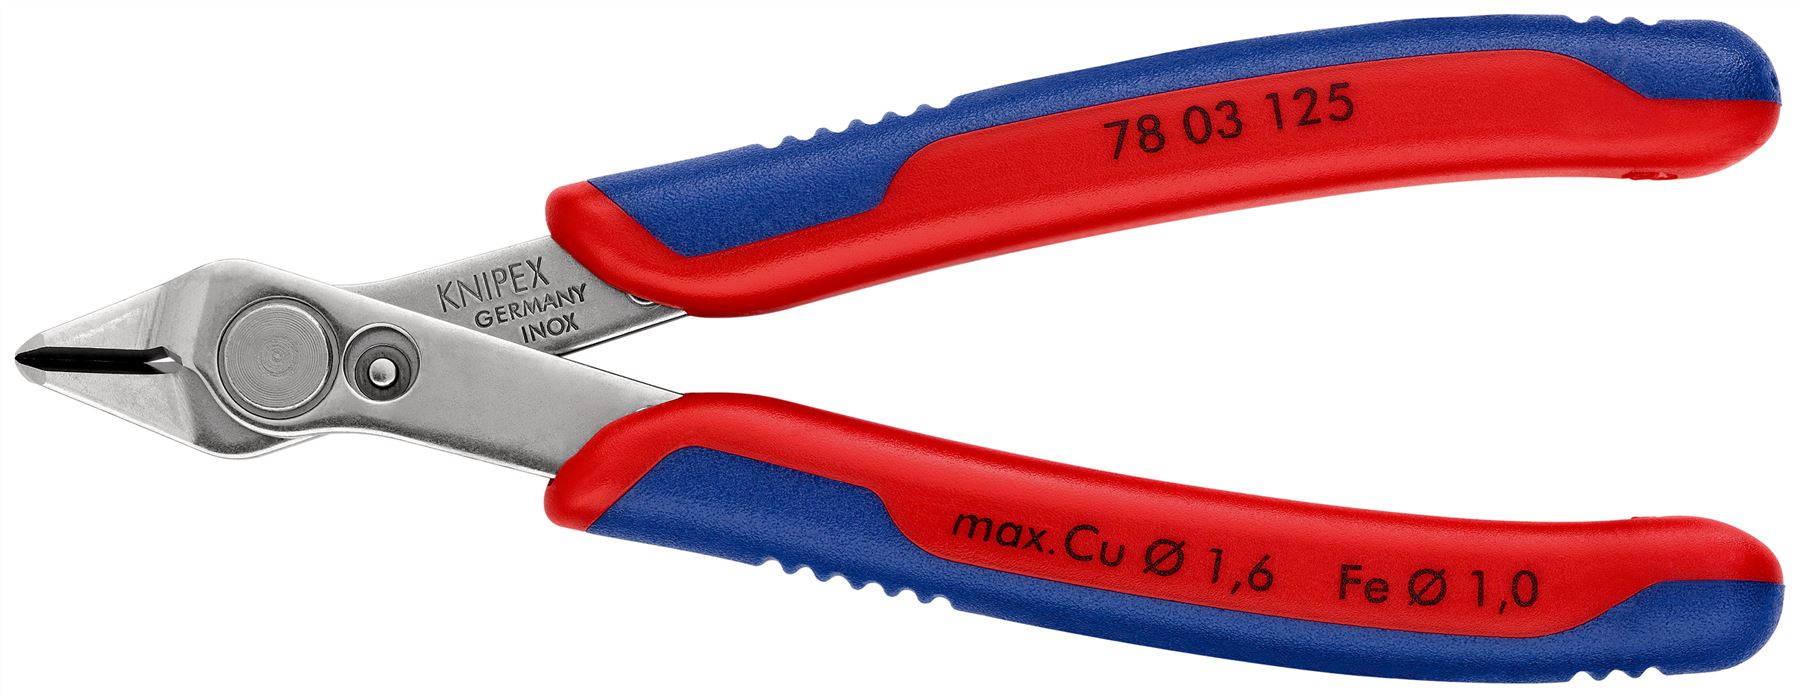 KNIPEX Electronics Super Knips Precision Cutting Pliers 125mm Multi Component Grips 78 03 125 SB